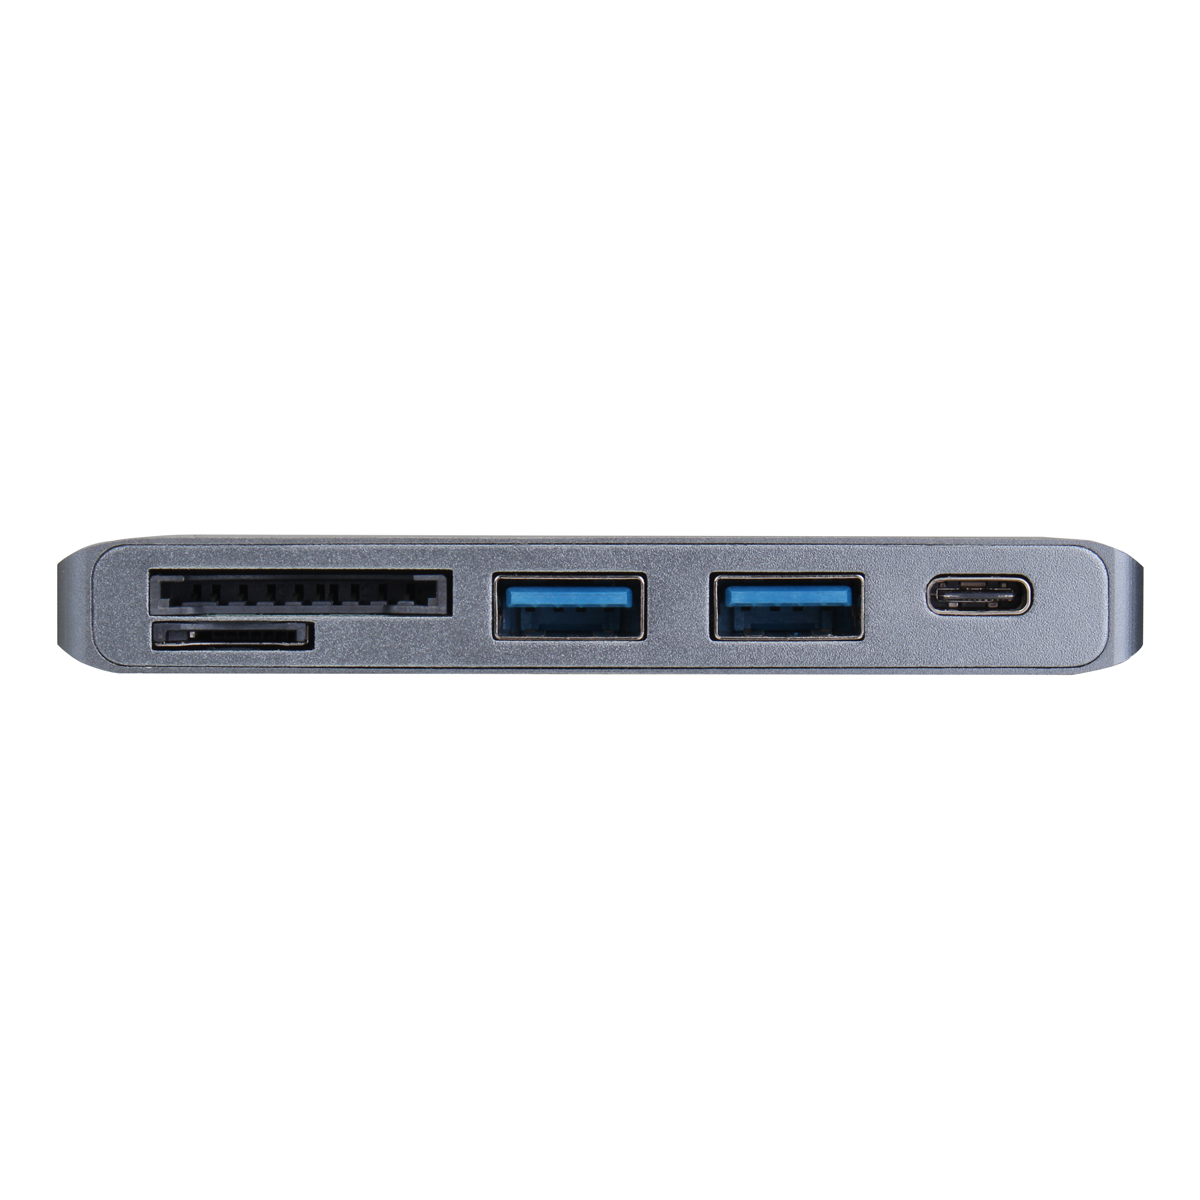 Multifunction-USB-Hub-Type-C-to-Type-C-USB-30-2Ports-TF-SD-Card-Reader-for-Laptop-PC-1153671-5